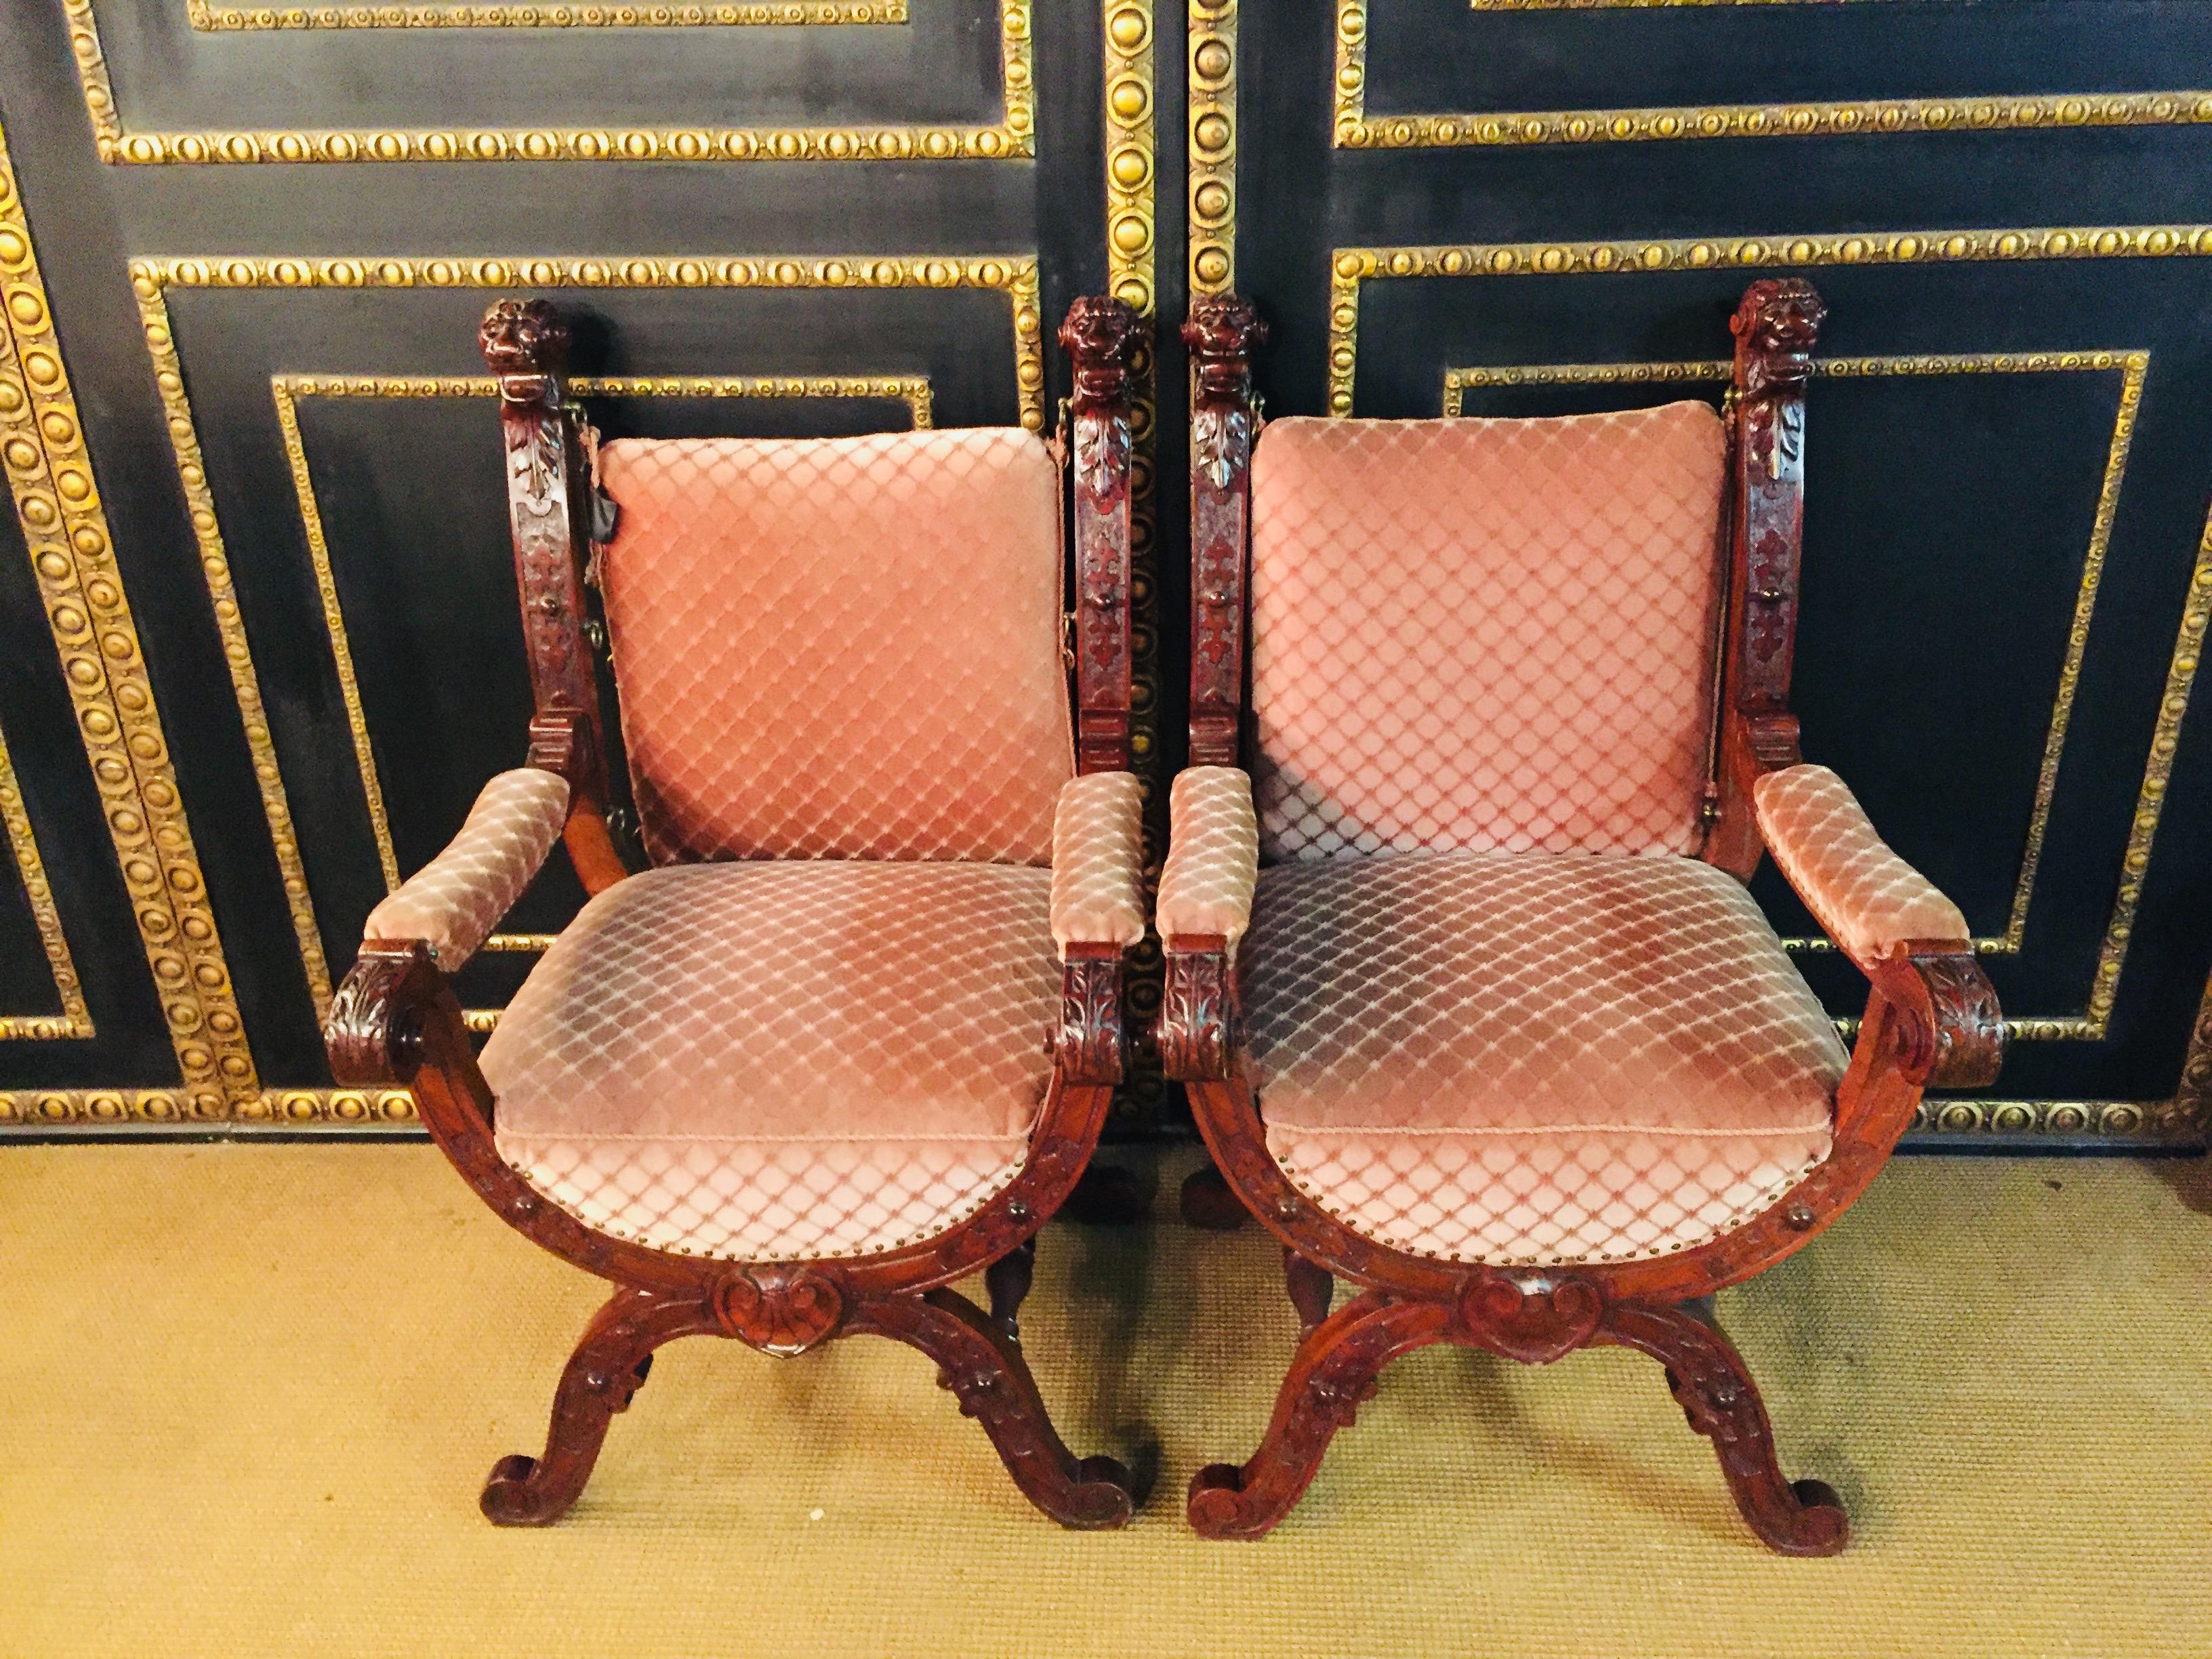 19th century 2 Armchairs solid walnut, all-round carved with historicism ornaments, backrest each side crowned by lion's heads with wide open mouth, scissor legs with baluster crossbars, backrest, upholstered seat and armrests.